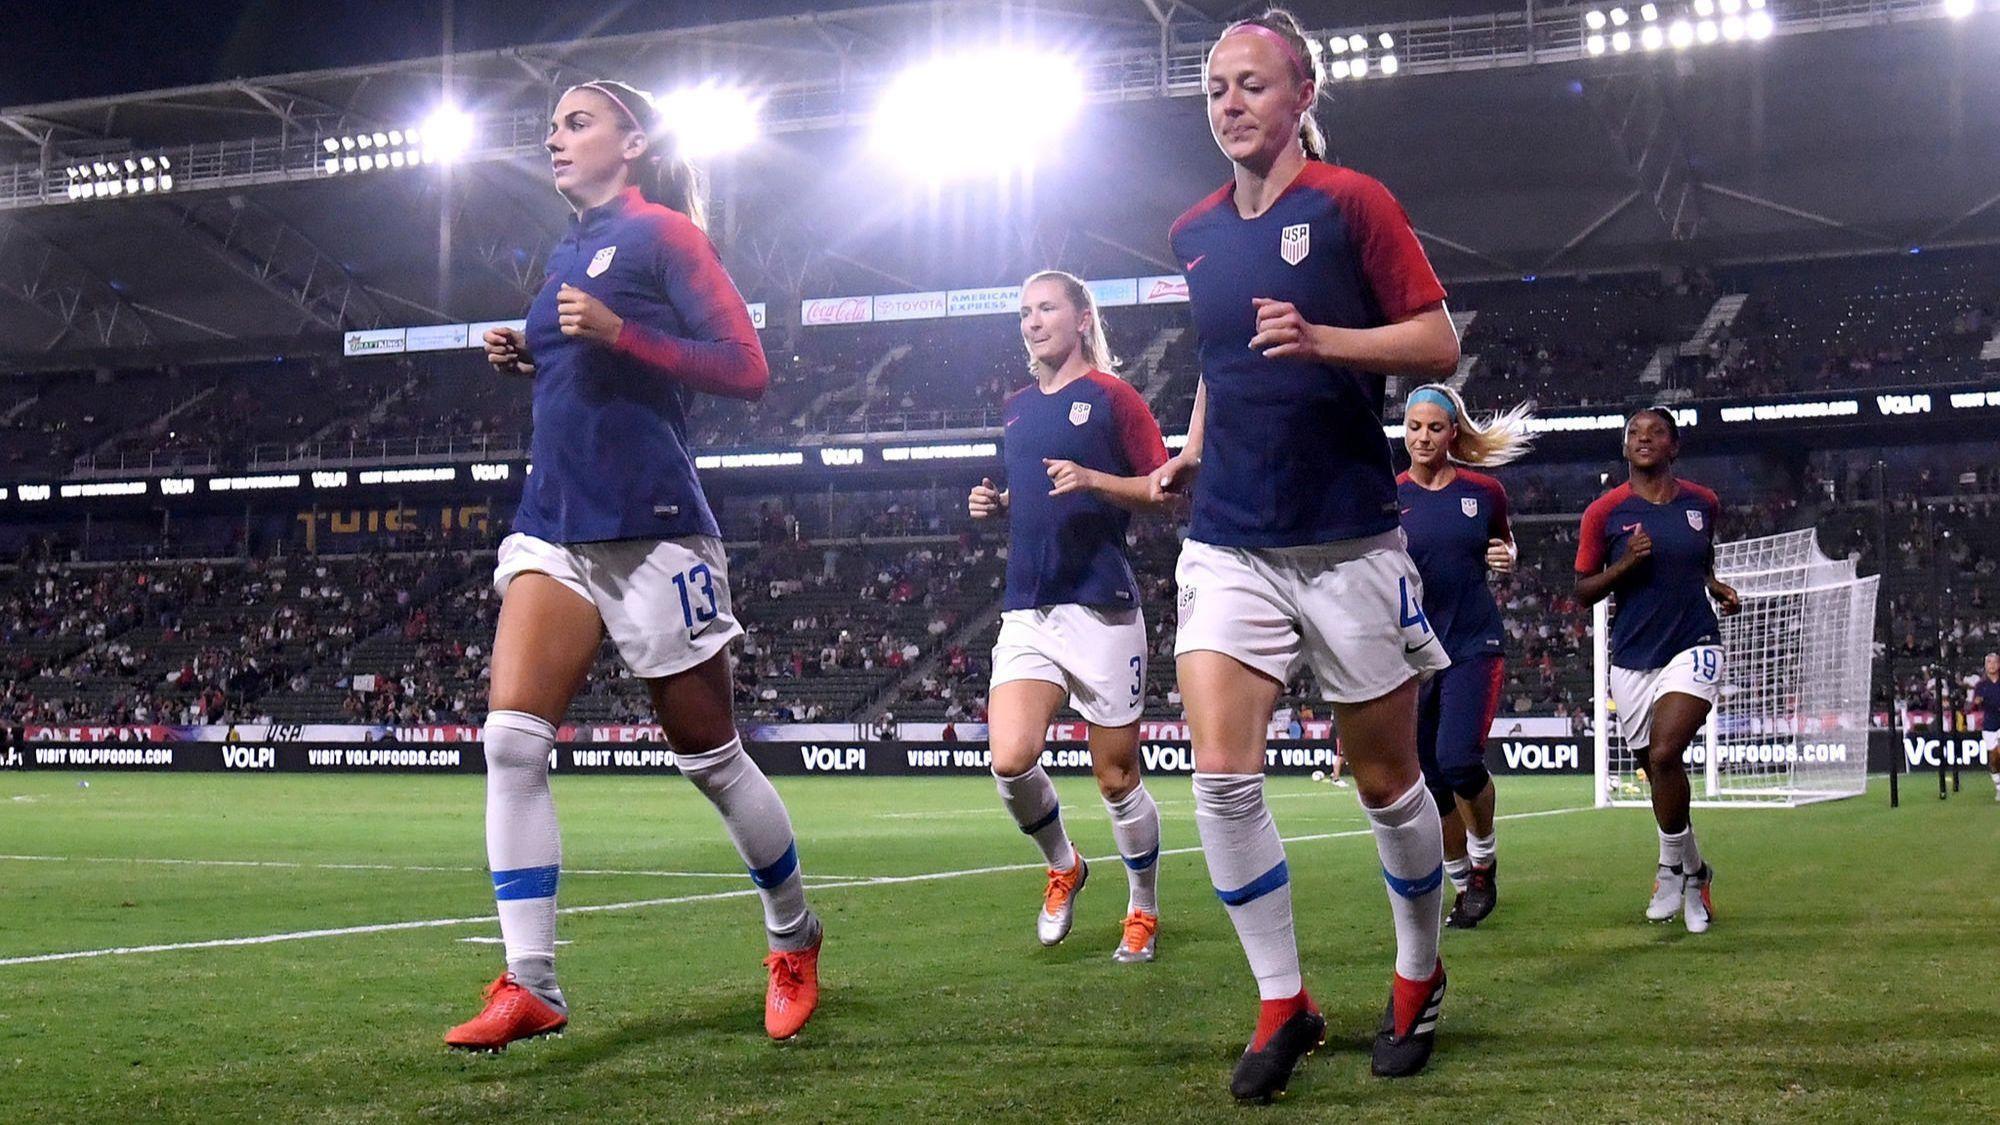 With no free pass to 2019 Women’s World Cup, U.S. team knows ‘we better not mess ...2000 x 1125